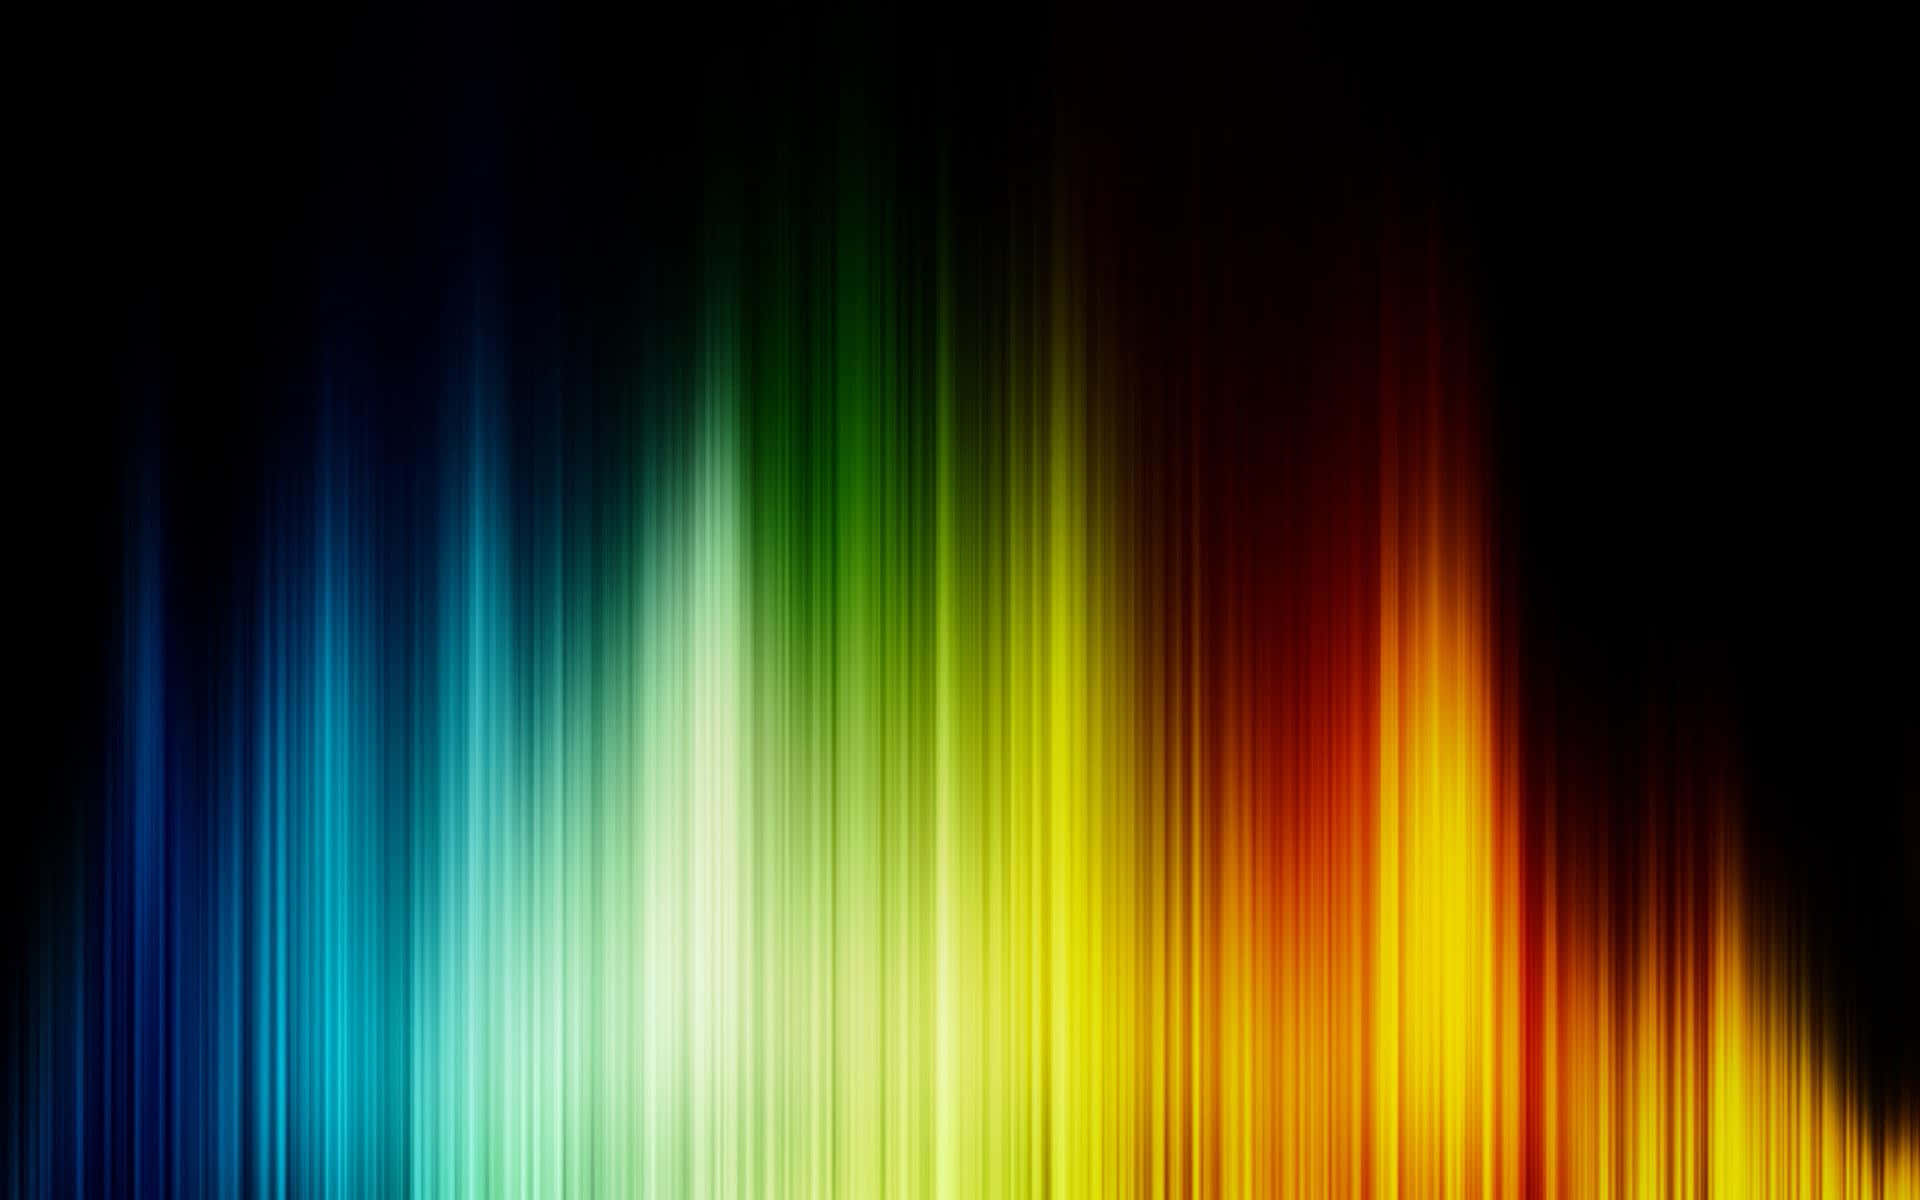 Vibrant Display Of The Color Spectrum Wallpaper